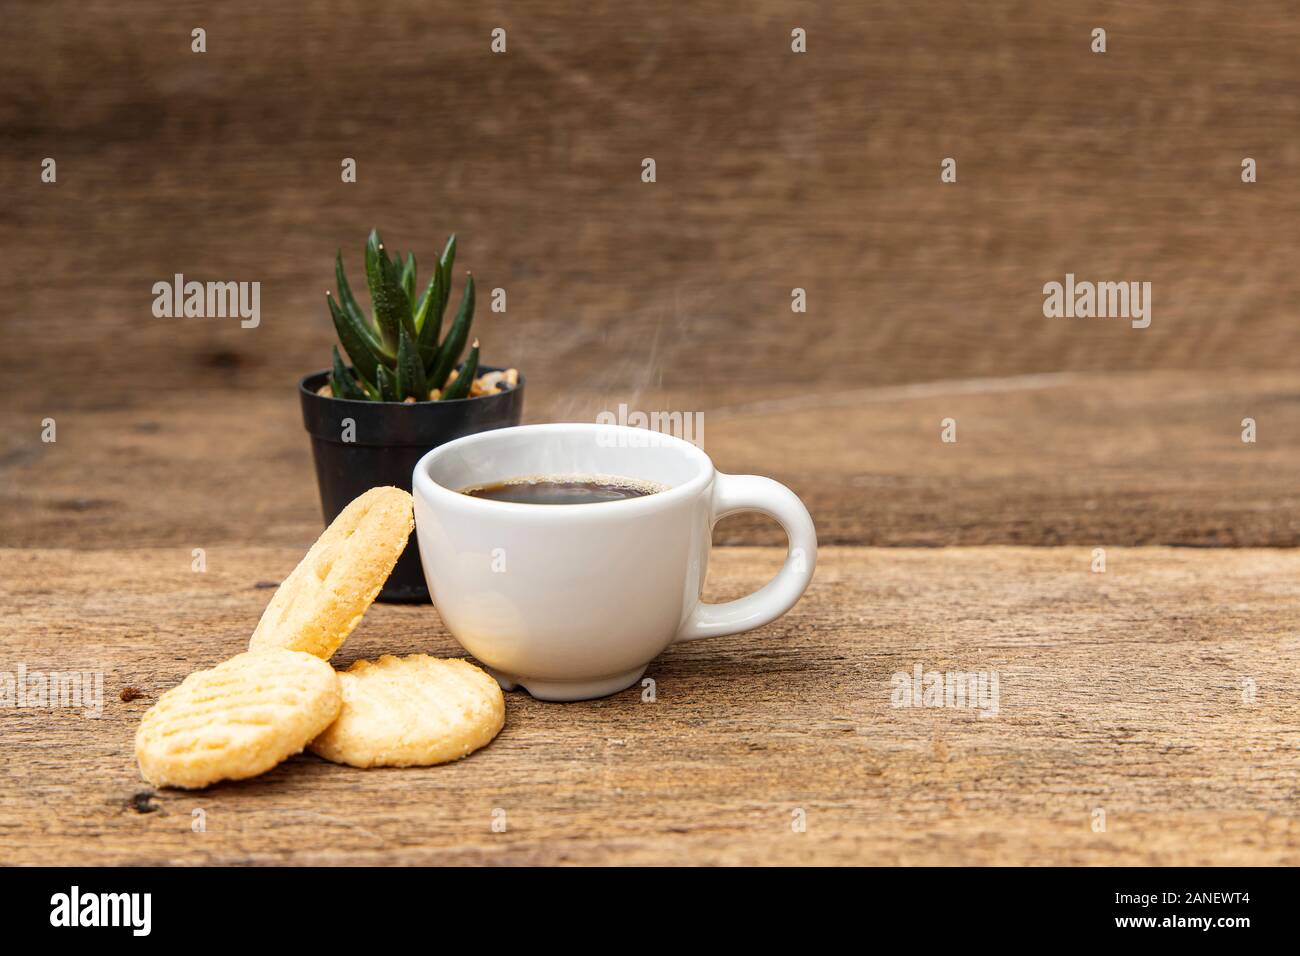 A white cup of coffee with cookie on the wooden table background. Stock Photo